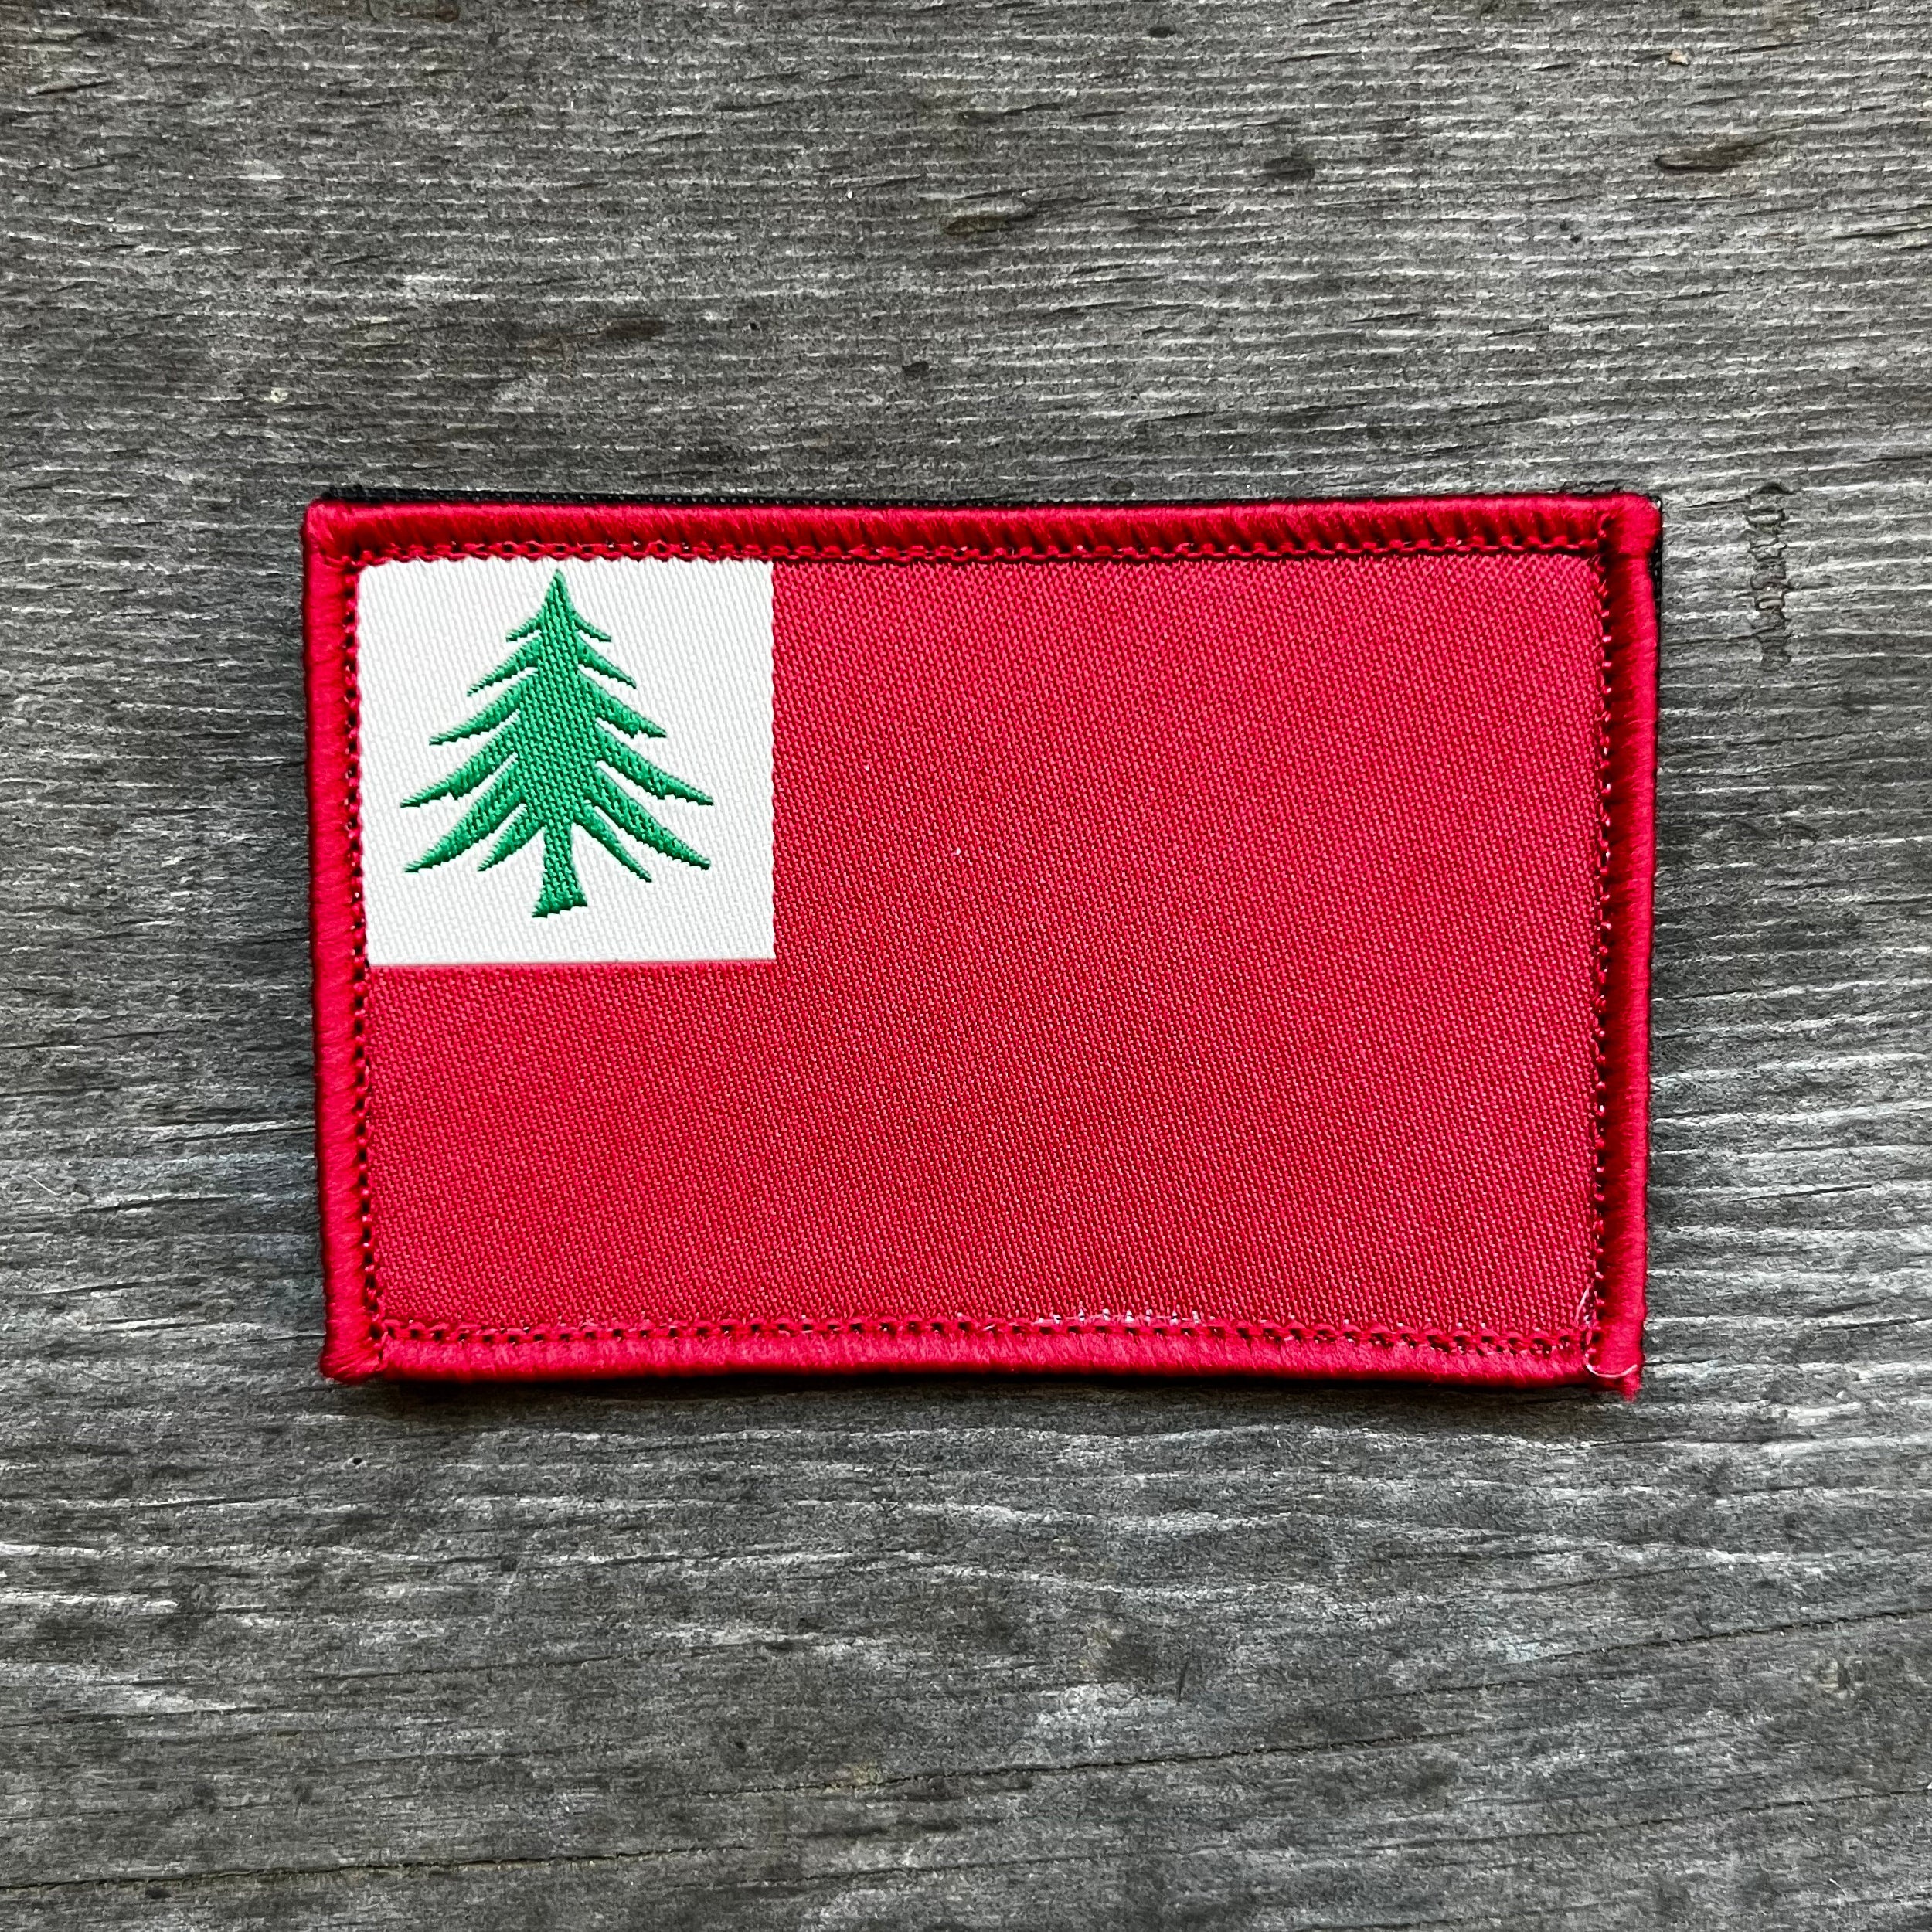 Guilford Courthouse Flag Morale Patch